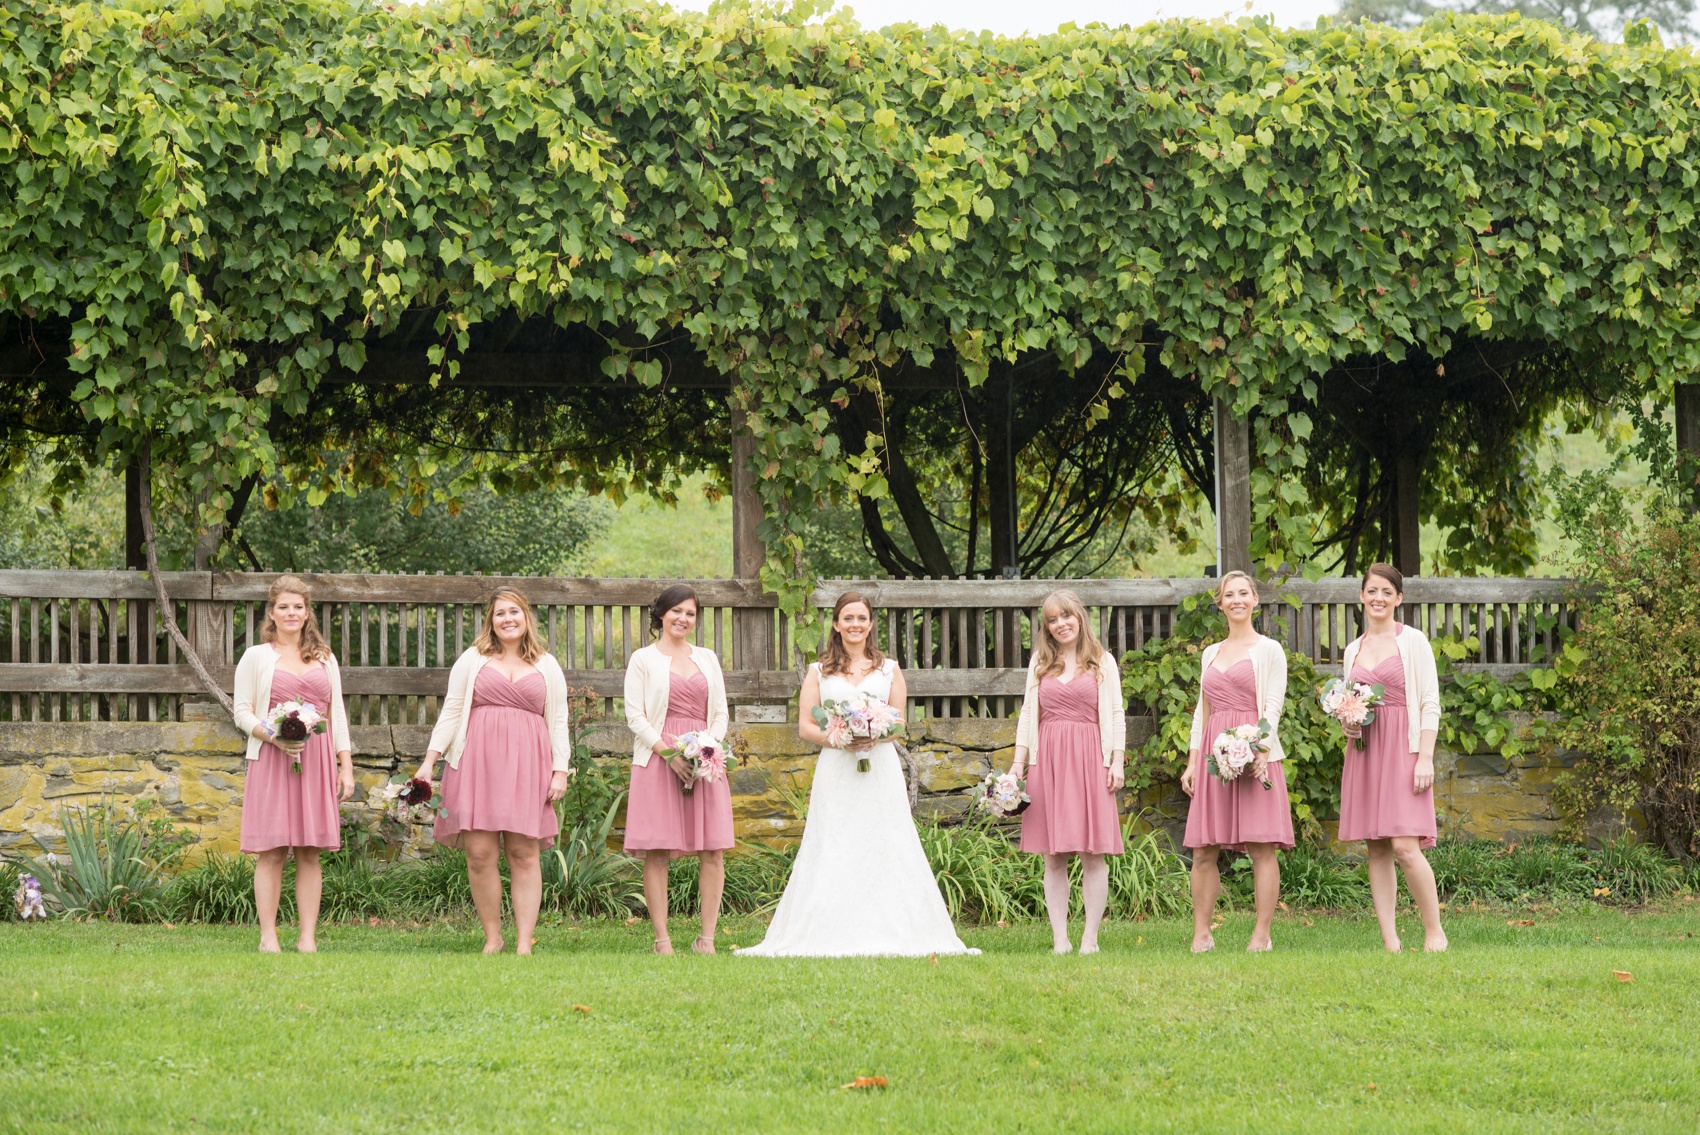 A Red Maple Vineyard wedding with dusty rose short dress bridesmaids. Photo by NYC wedding photographer Mikkel Paige Photography.